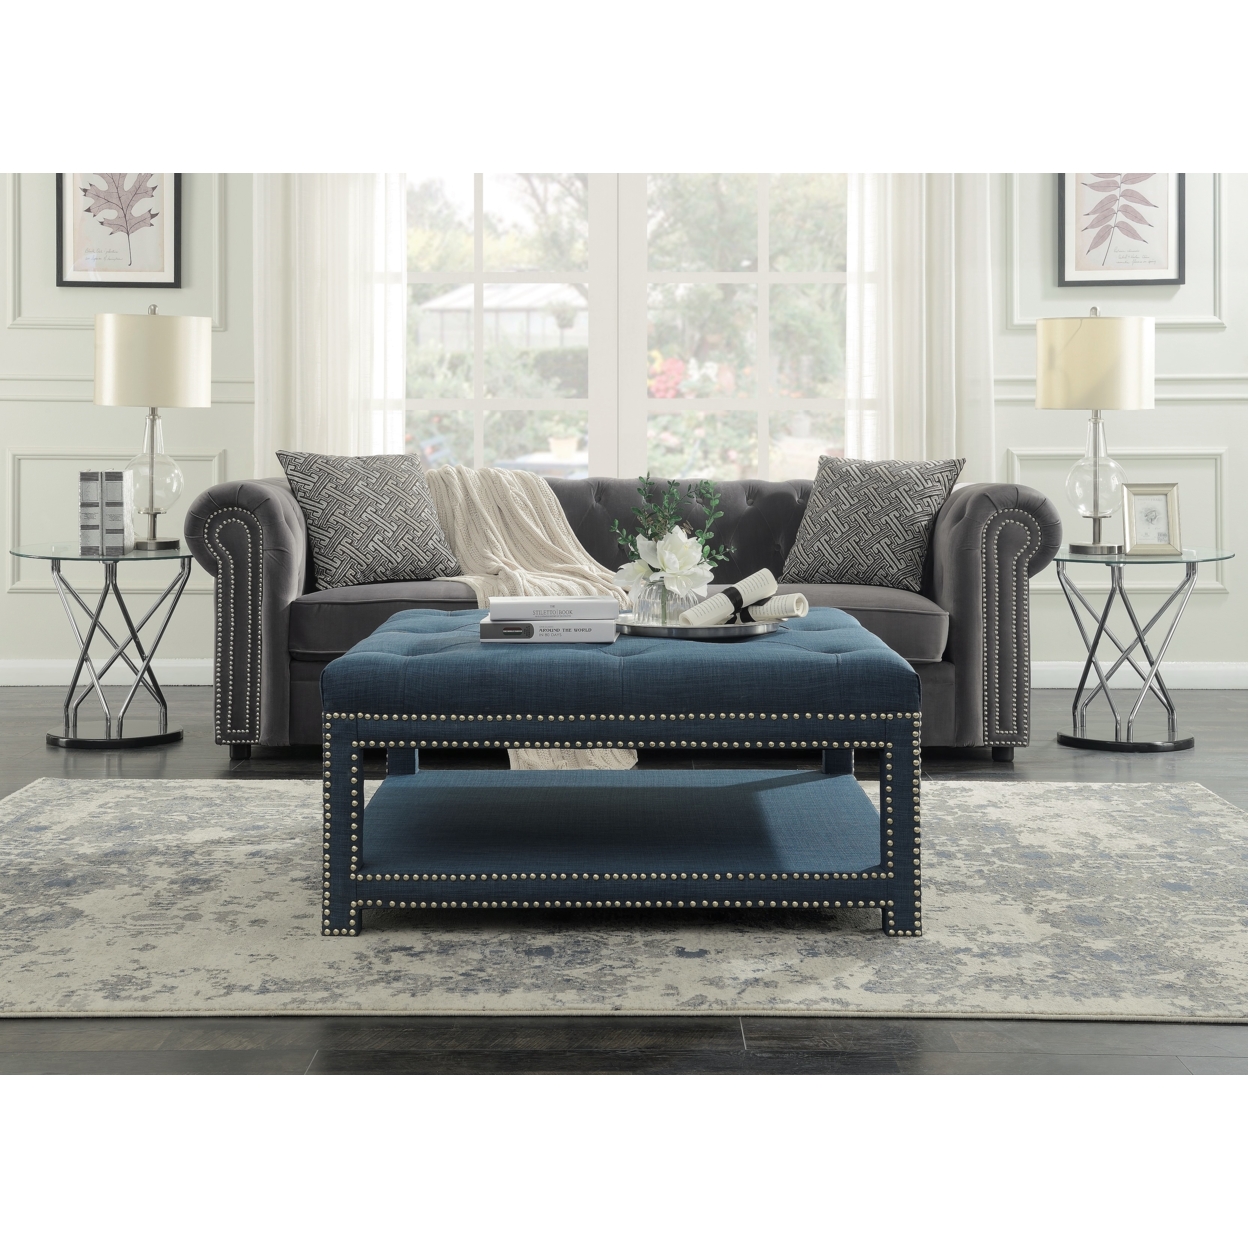 Quinn Coffee Table Ottoman 2-Layer Polished Nailhead Tufted Linen Bench - Blue